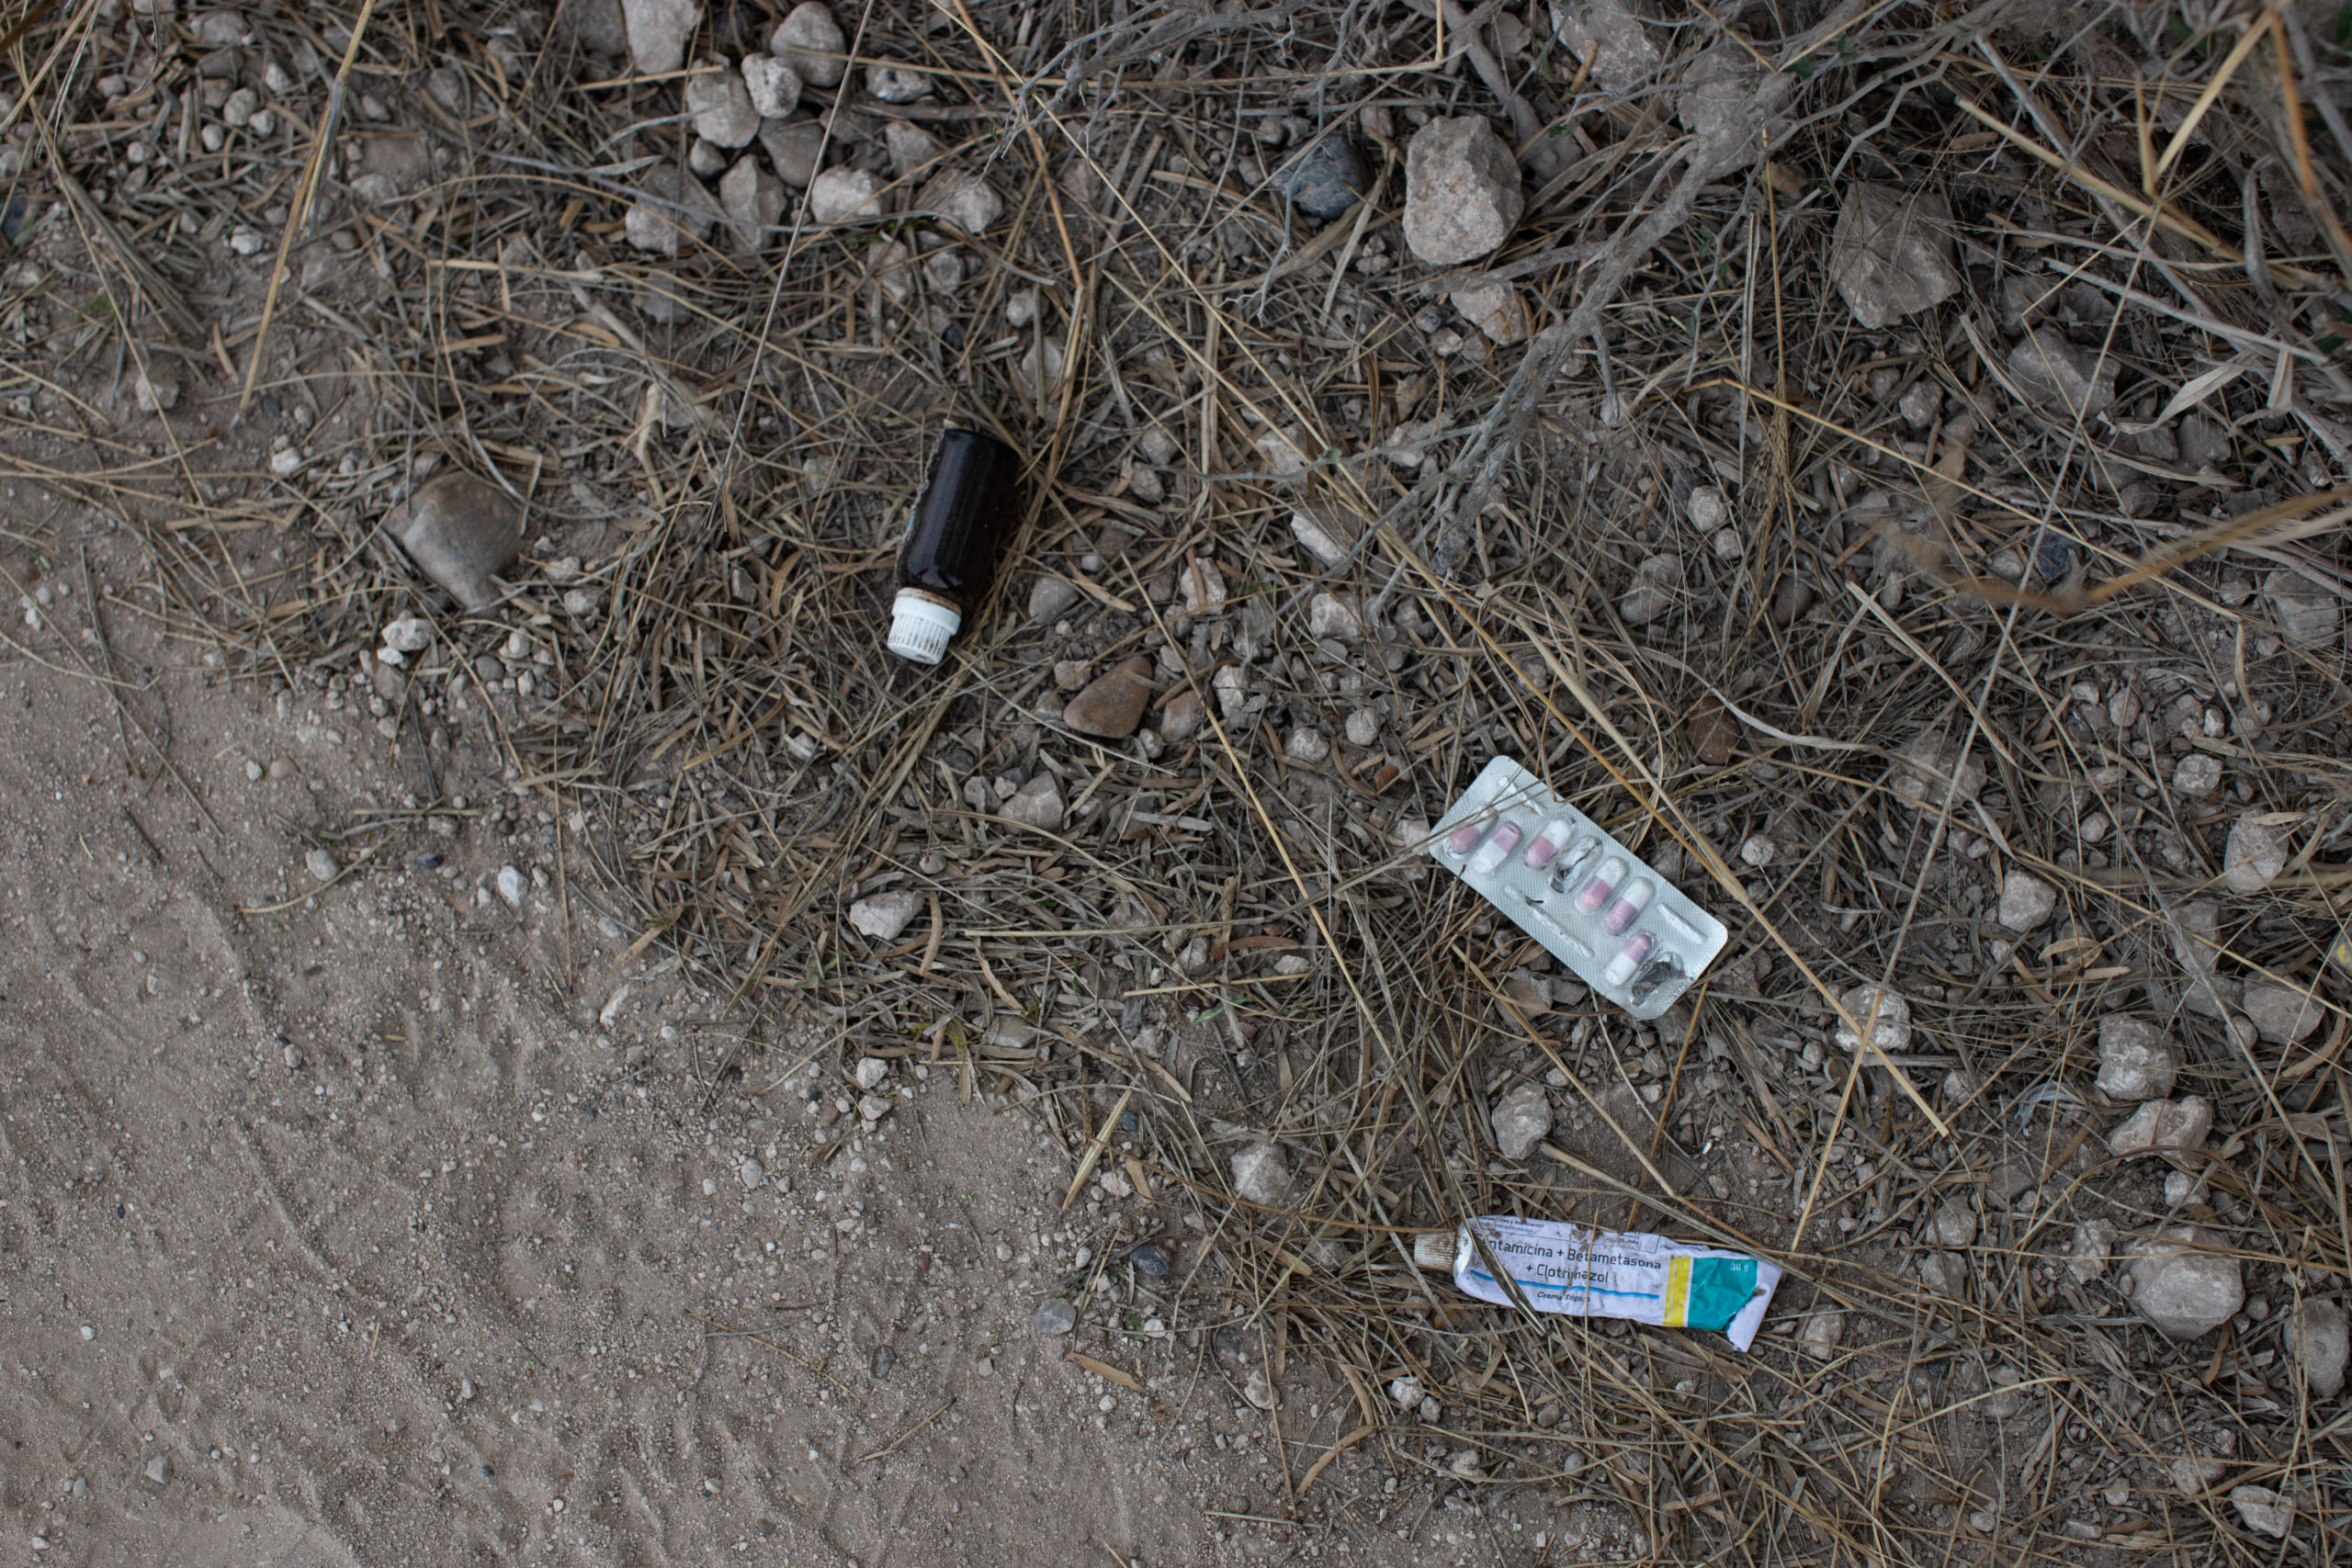 A private landowner has found increasing amounts of trash left behind by illegal migrants including medication, bags, clothing and bottles as they walk to a Customs and Border Protection field processing facility under the Anzalduas International Bridge near Mission, Texas, on March 26, 2021. (Kaylee Greenlee - Daily Caller News Foundation)